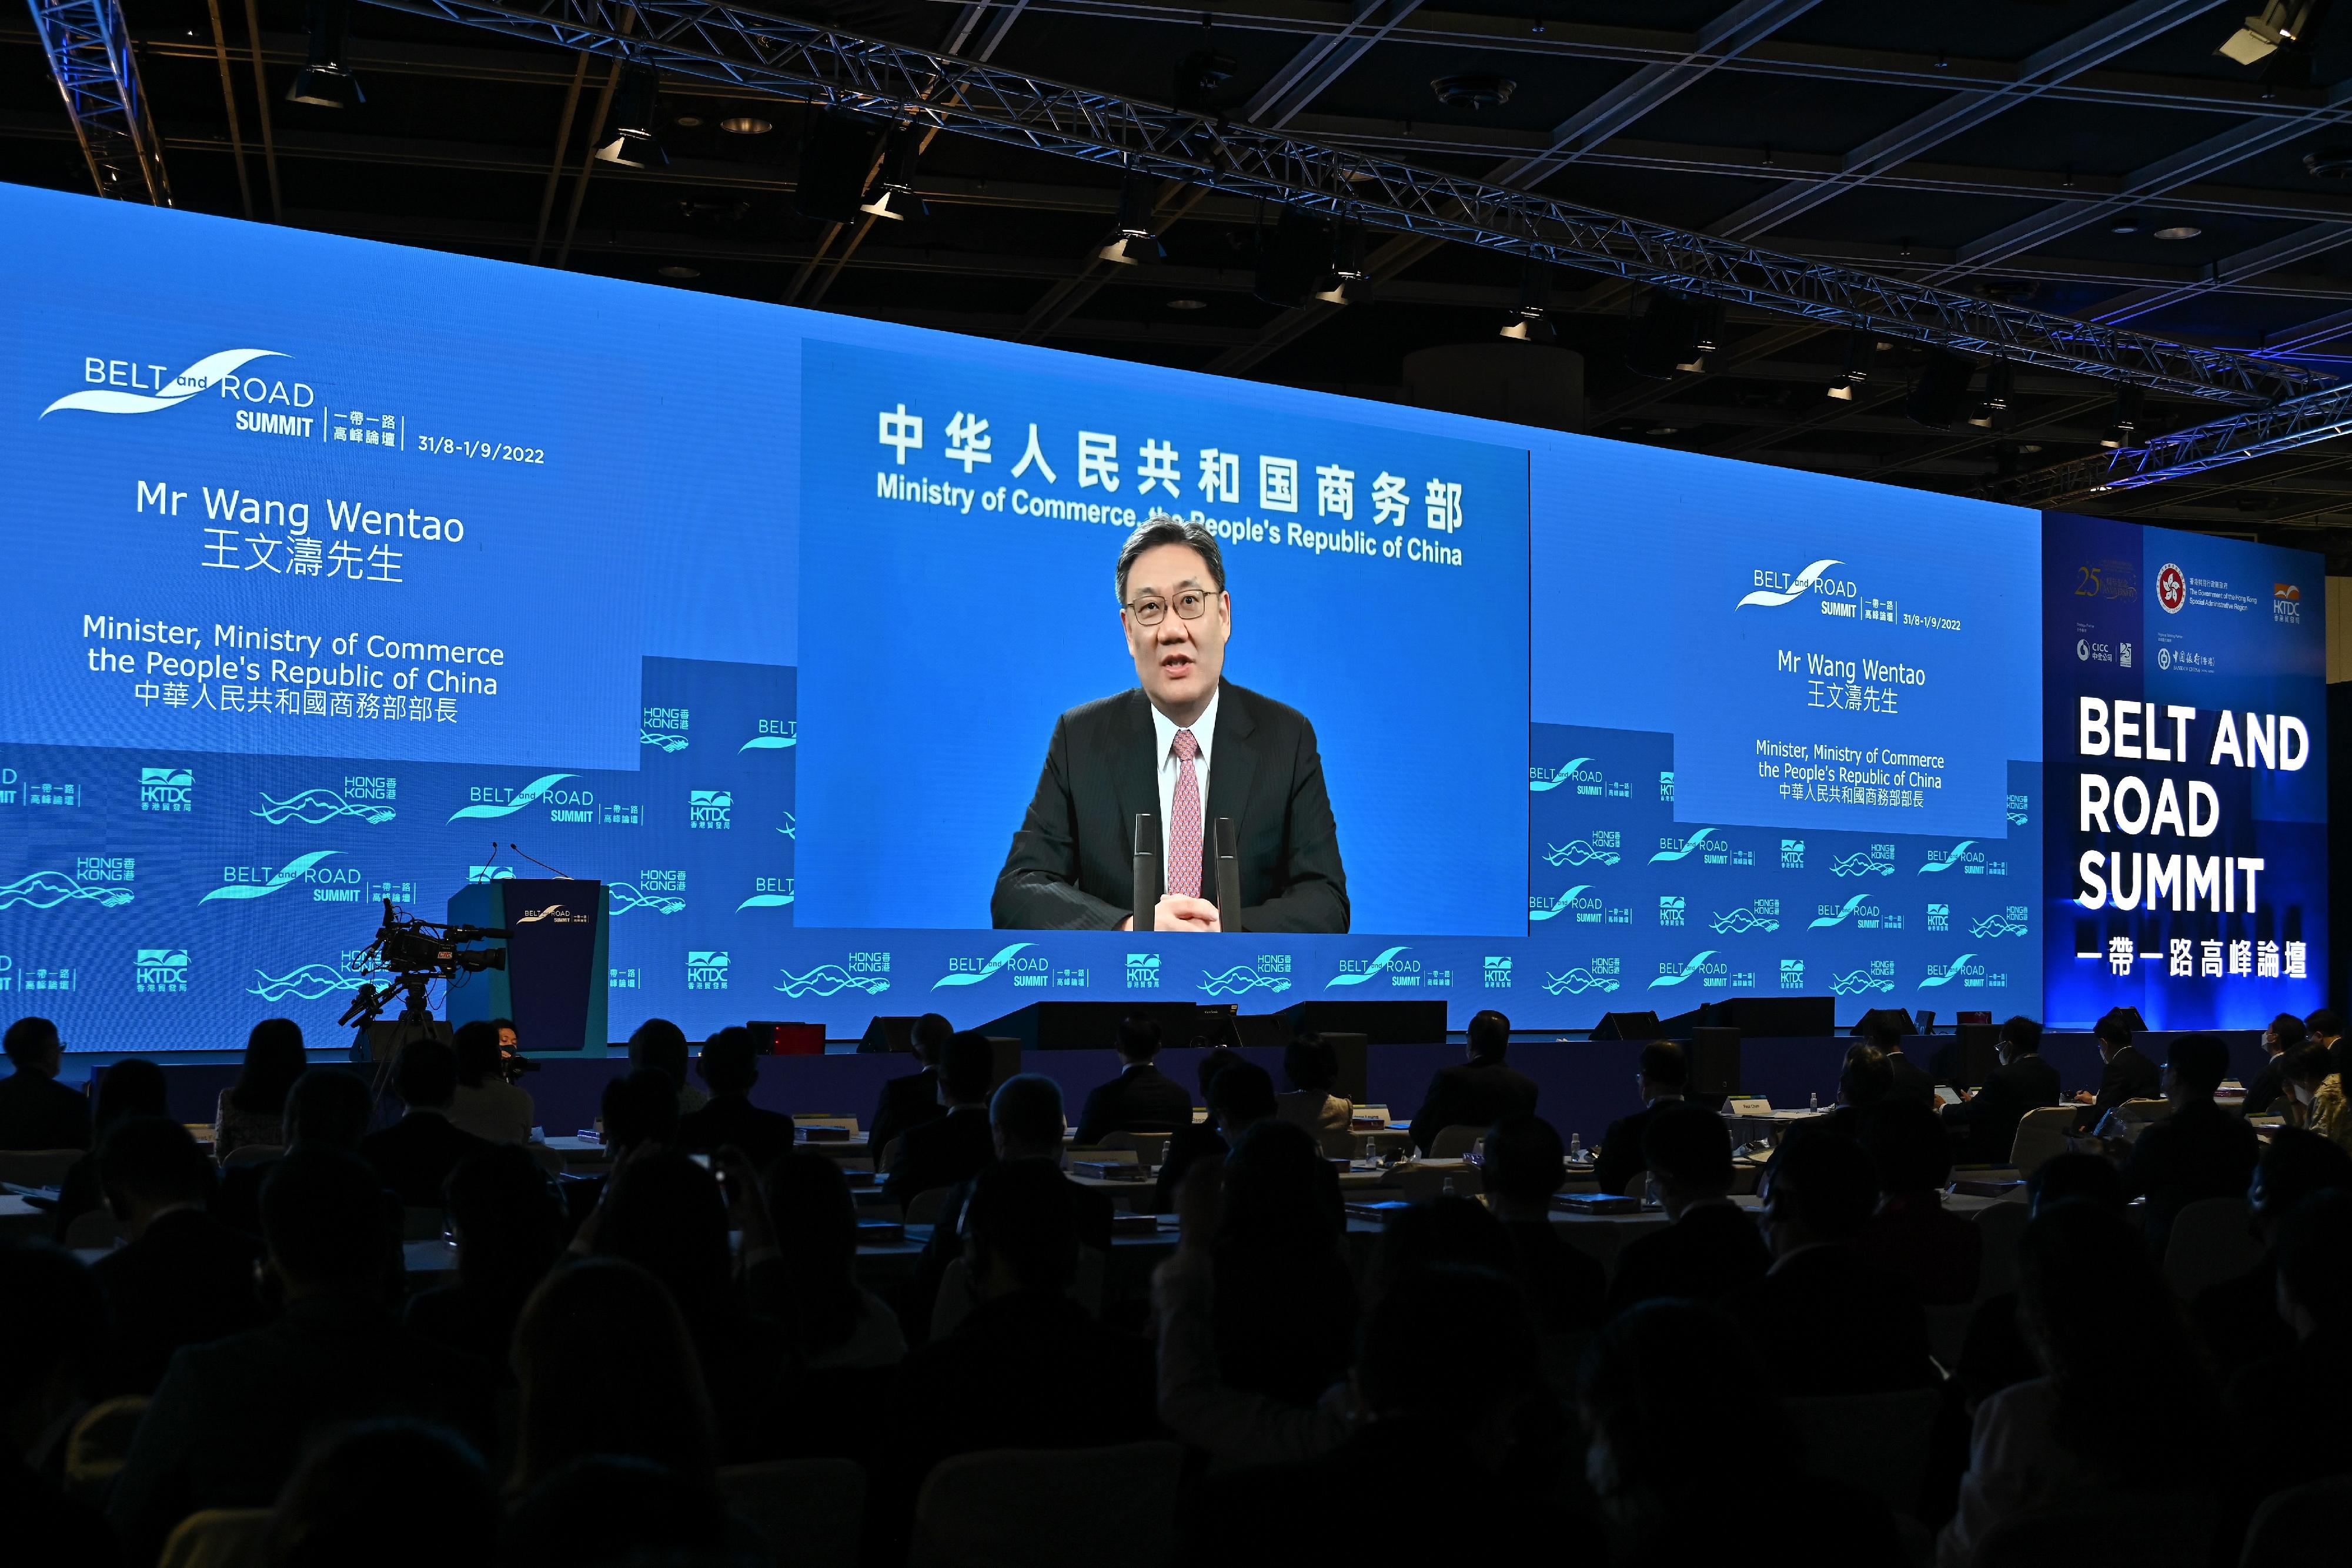 The seventh Belt and Road Summit opened today (August 31). The Minister of Commerce, Mr Wang Wentao, spoke online at the opening session this morning.